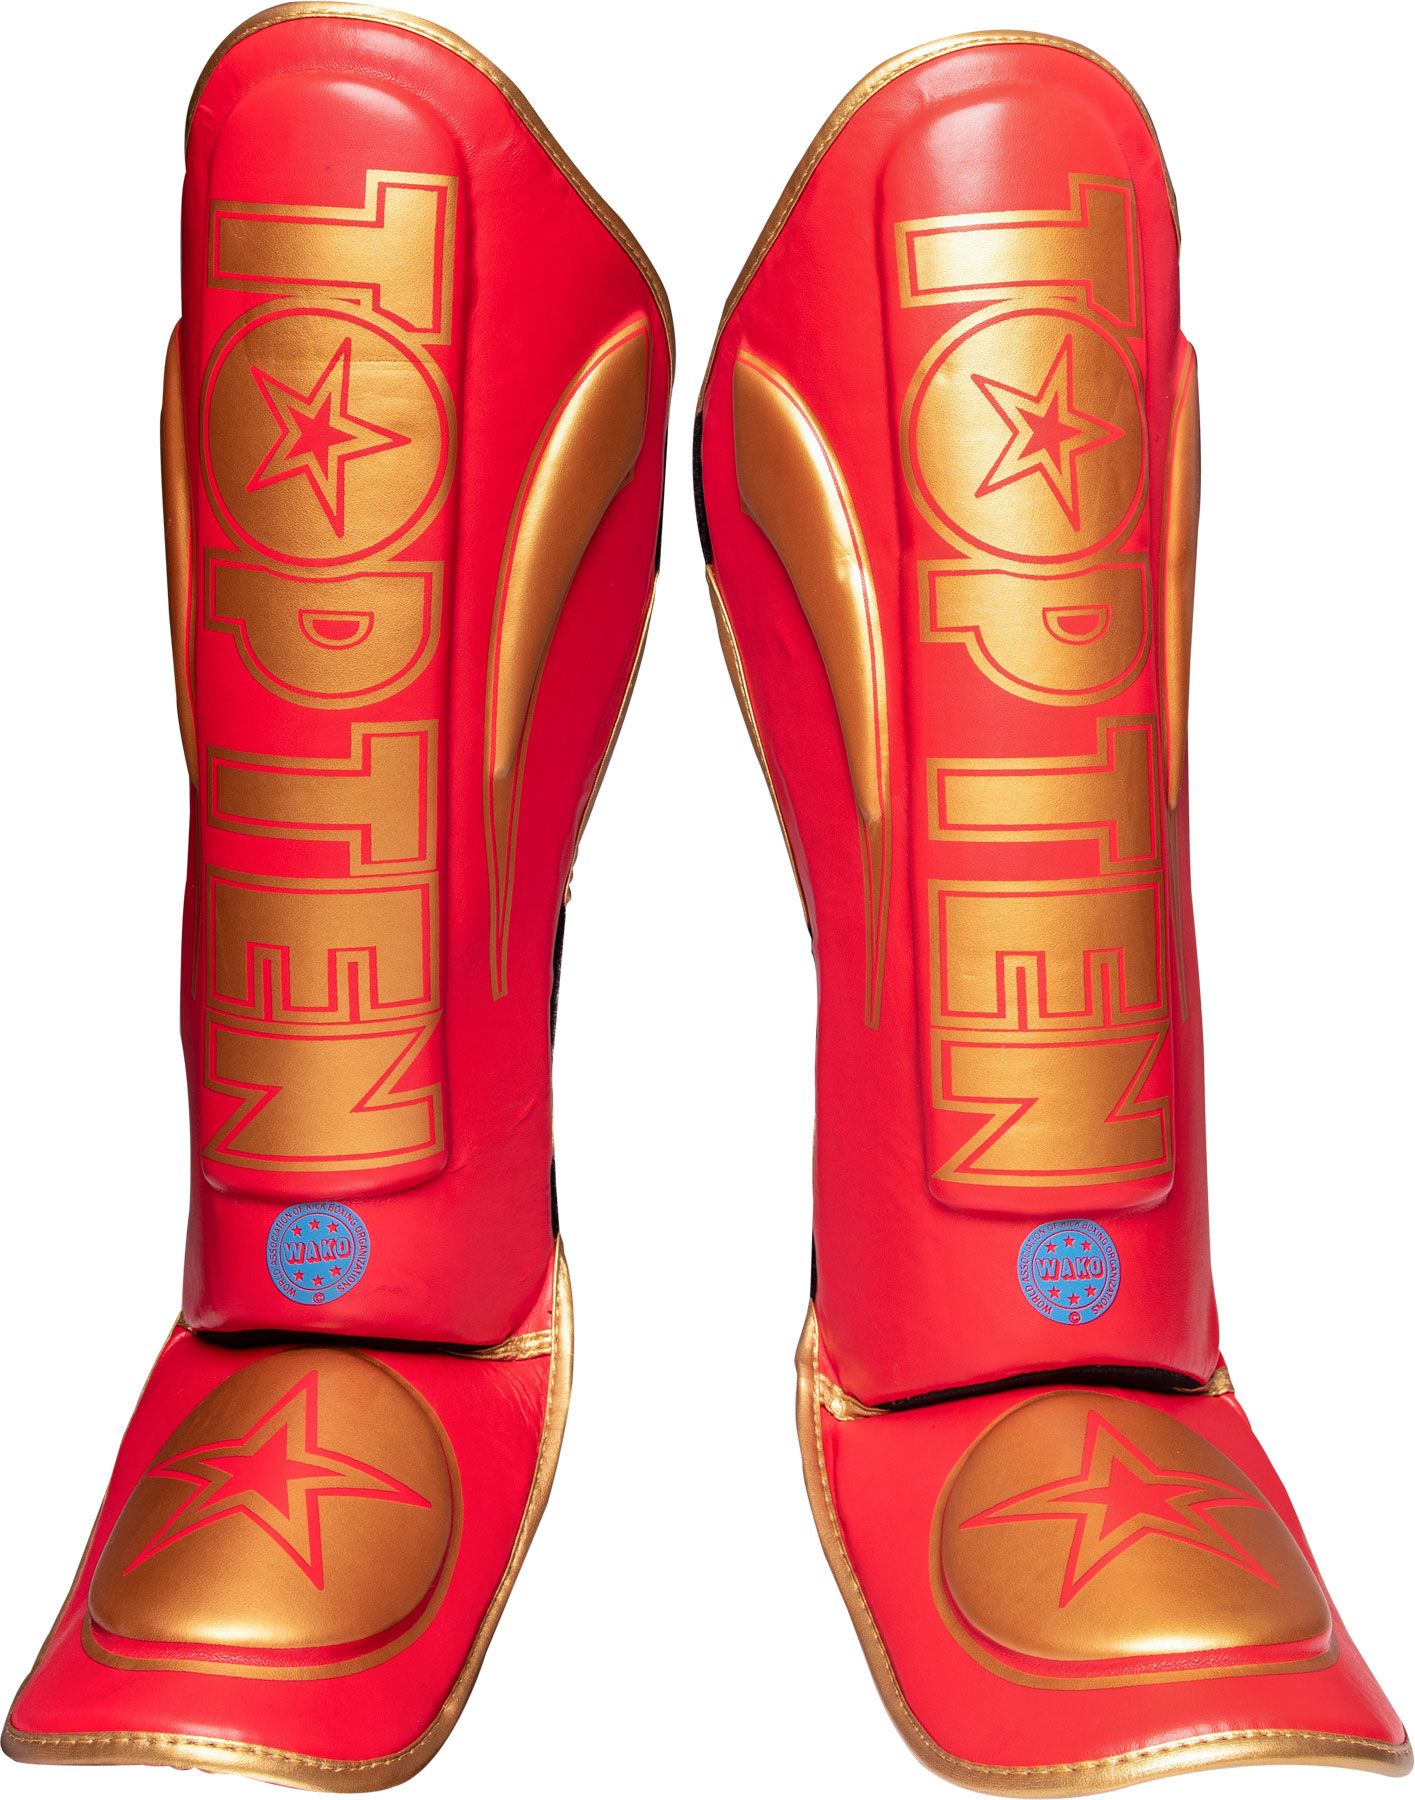 Details about   Top Ten Wako Approved Kick Boxing Shin Instep Pads Guards Protection Leg Shins 